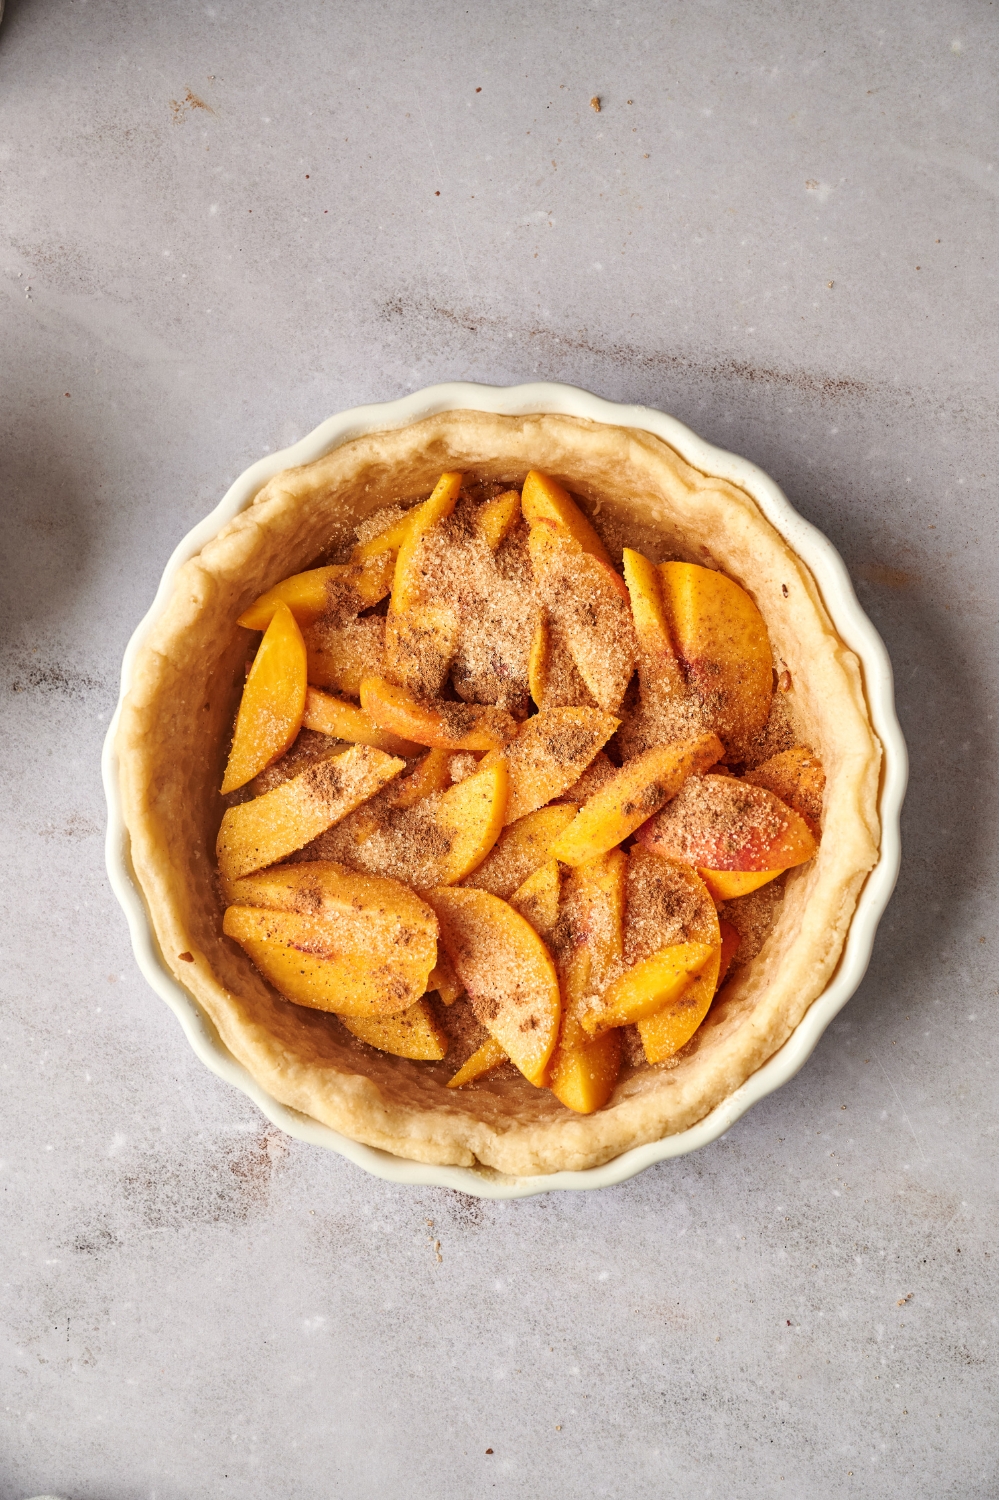 A pie dish with a puff pastry layer with sliced peaches tossed in cinnamon, nutmeg, and sugar.